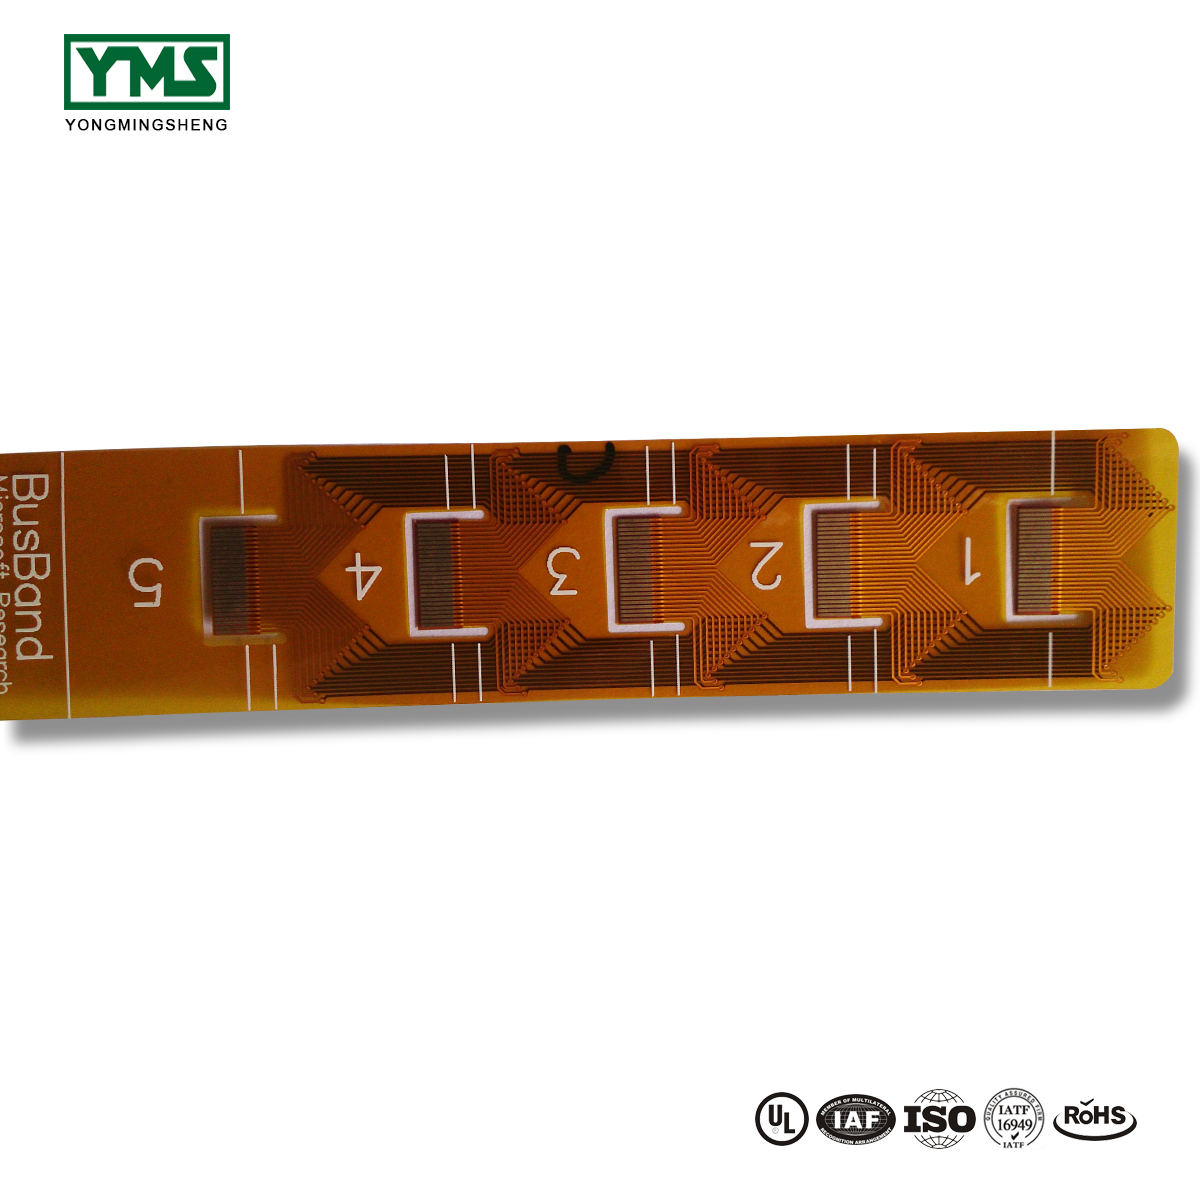 Factory made hot-sale Rigid-Flex And Flexible Pcb - 0.10mm Ultrathin  2Layer FPC | YMS PCB – Yongmingsheng